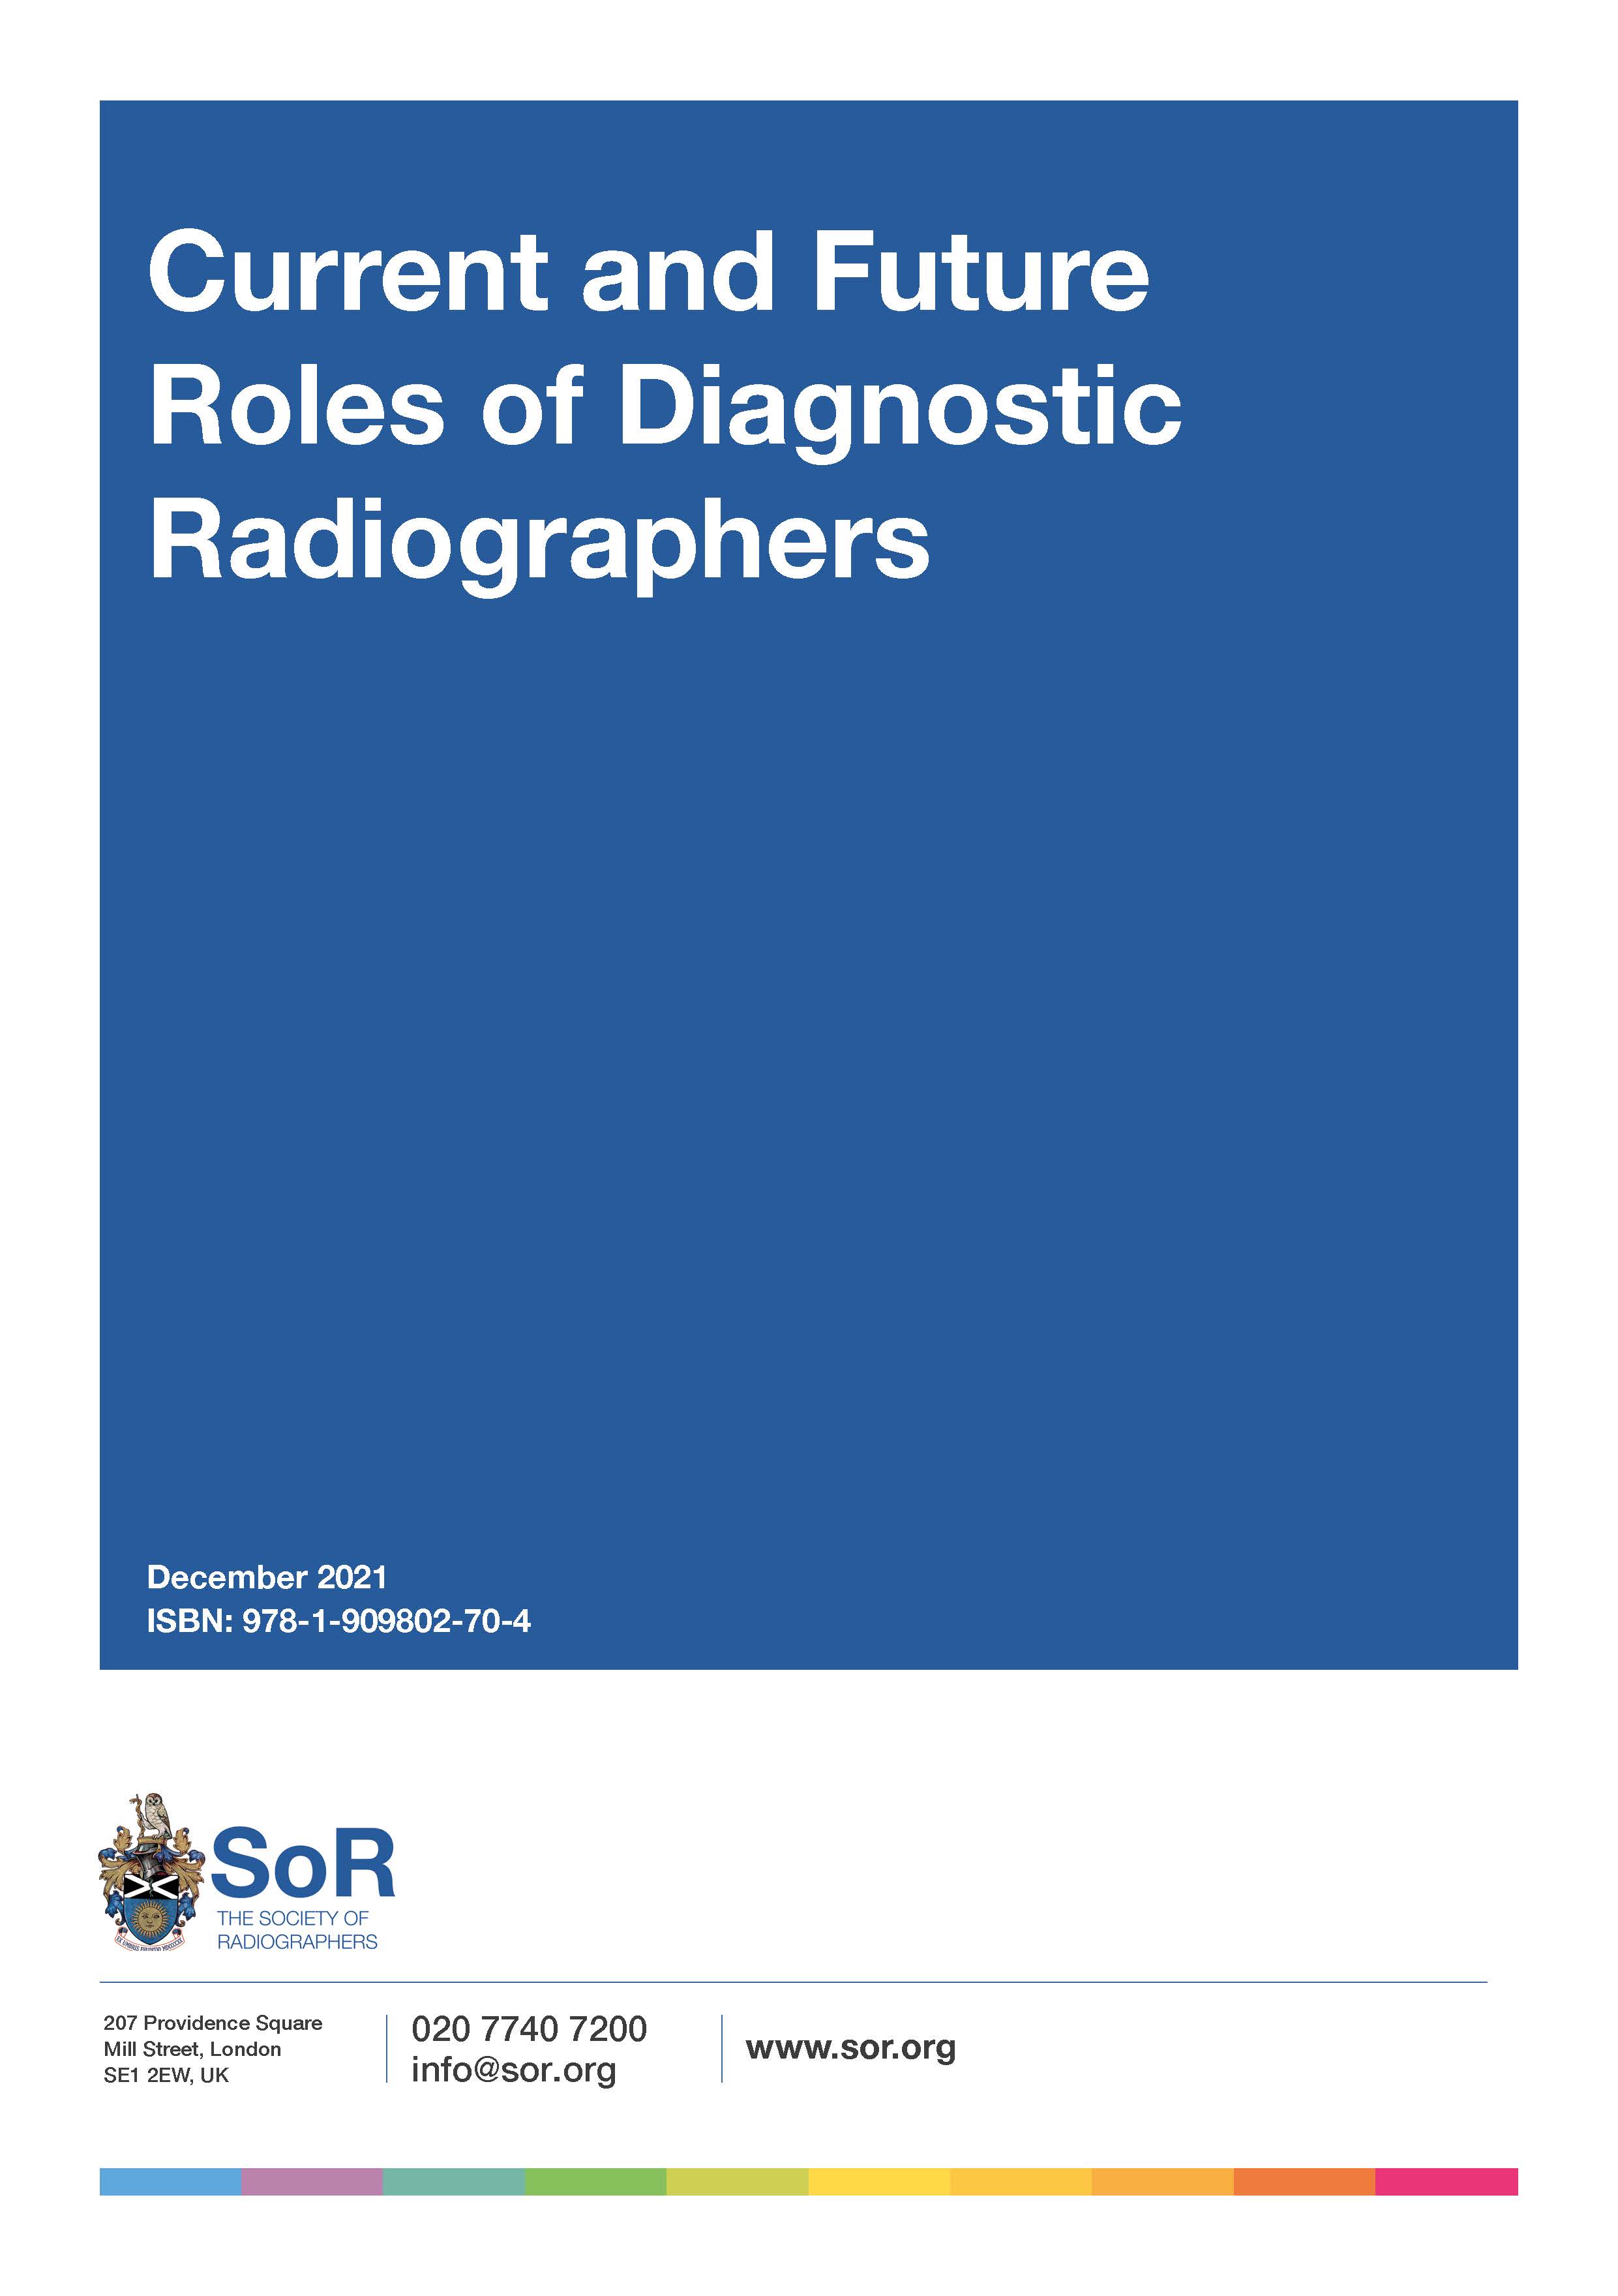 Current and future roles of diagnostic radiographers